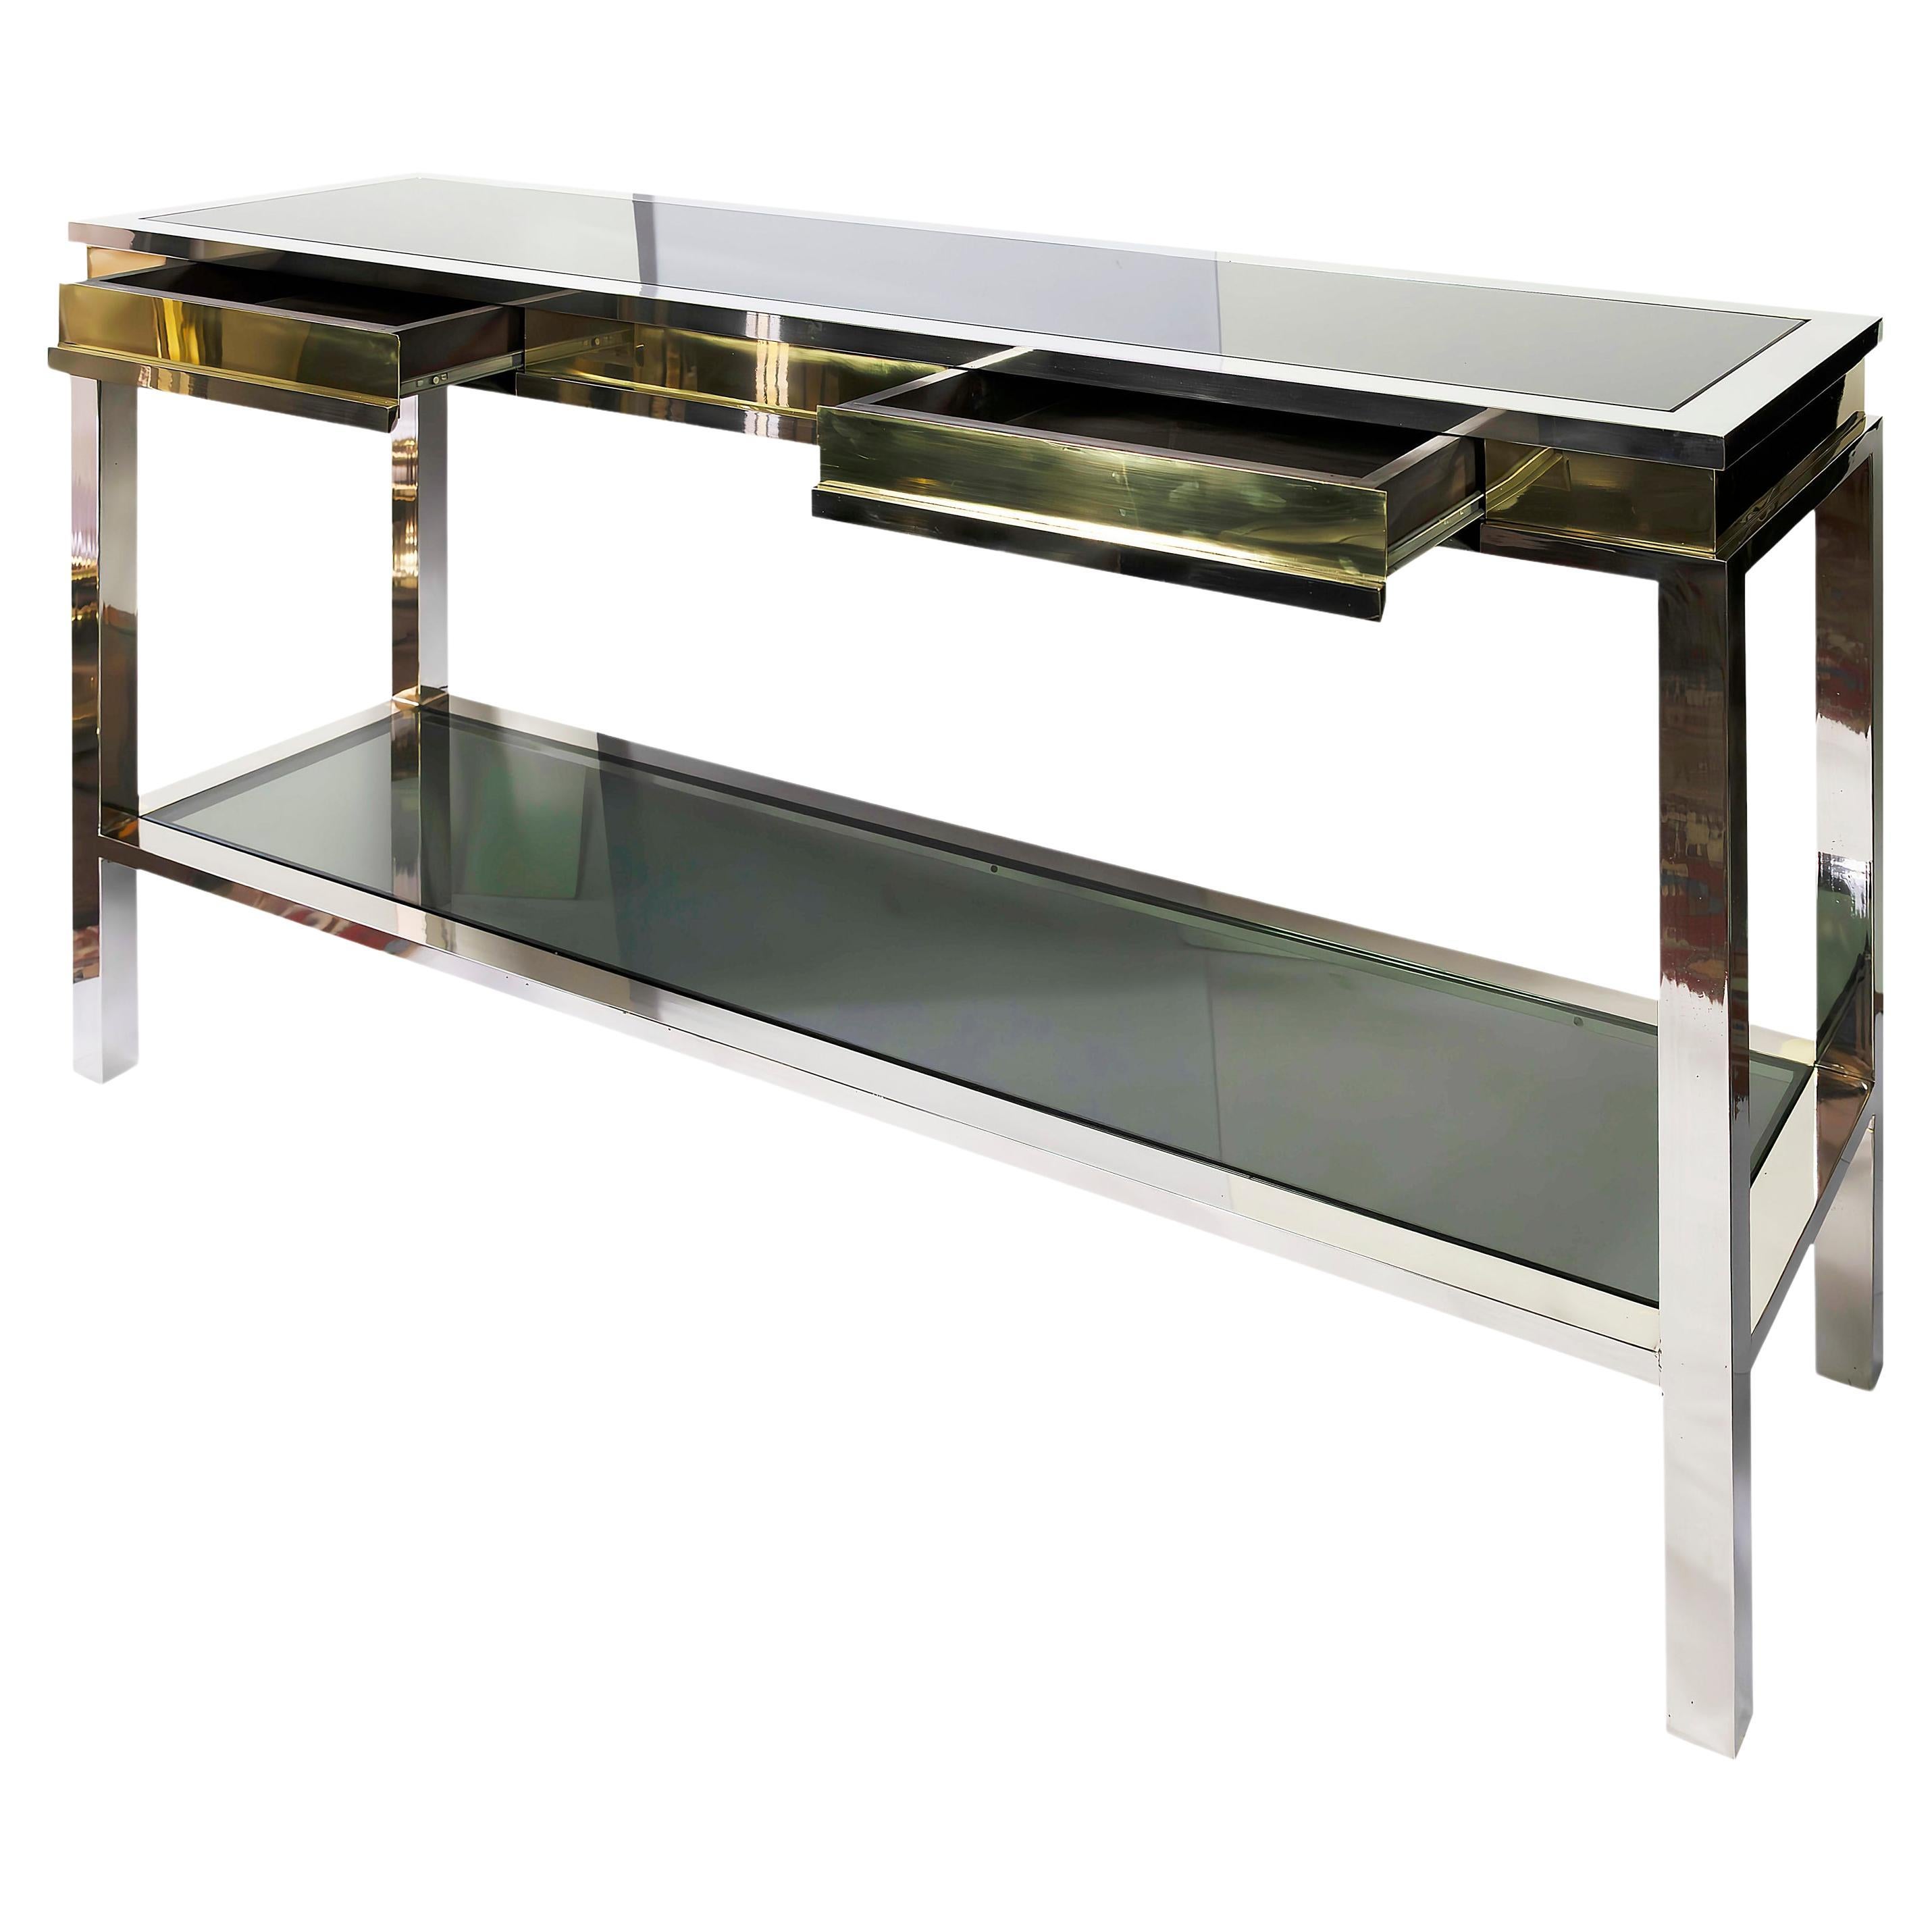 Mid-Century Italian Console Table with Drawers in Brass, Chrome, Glass, 1970's For Sale